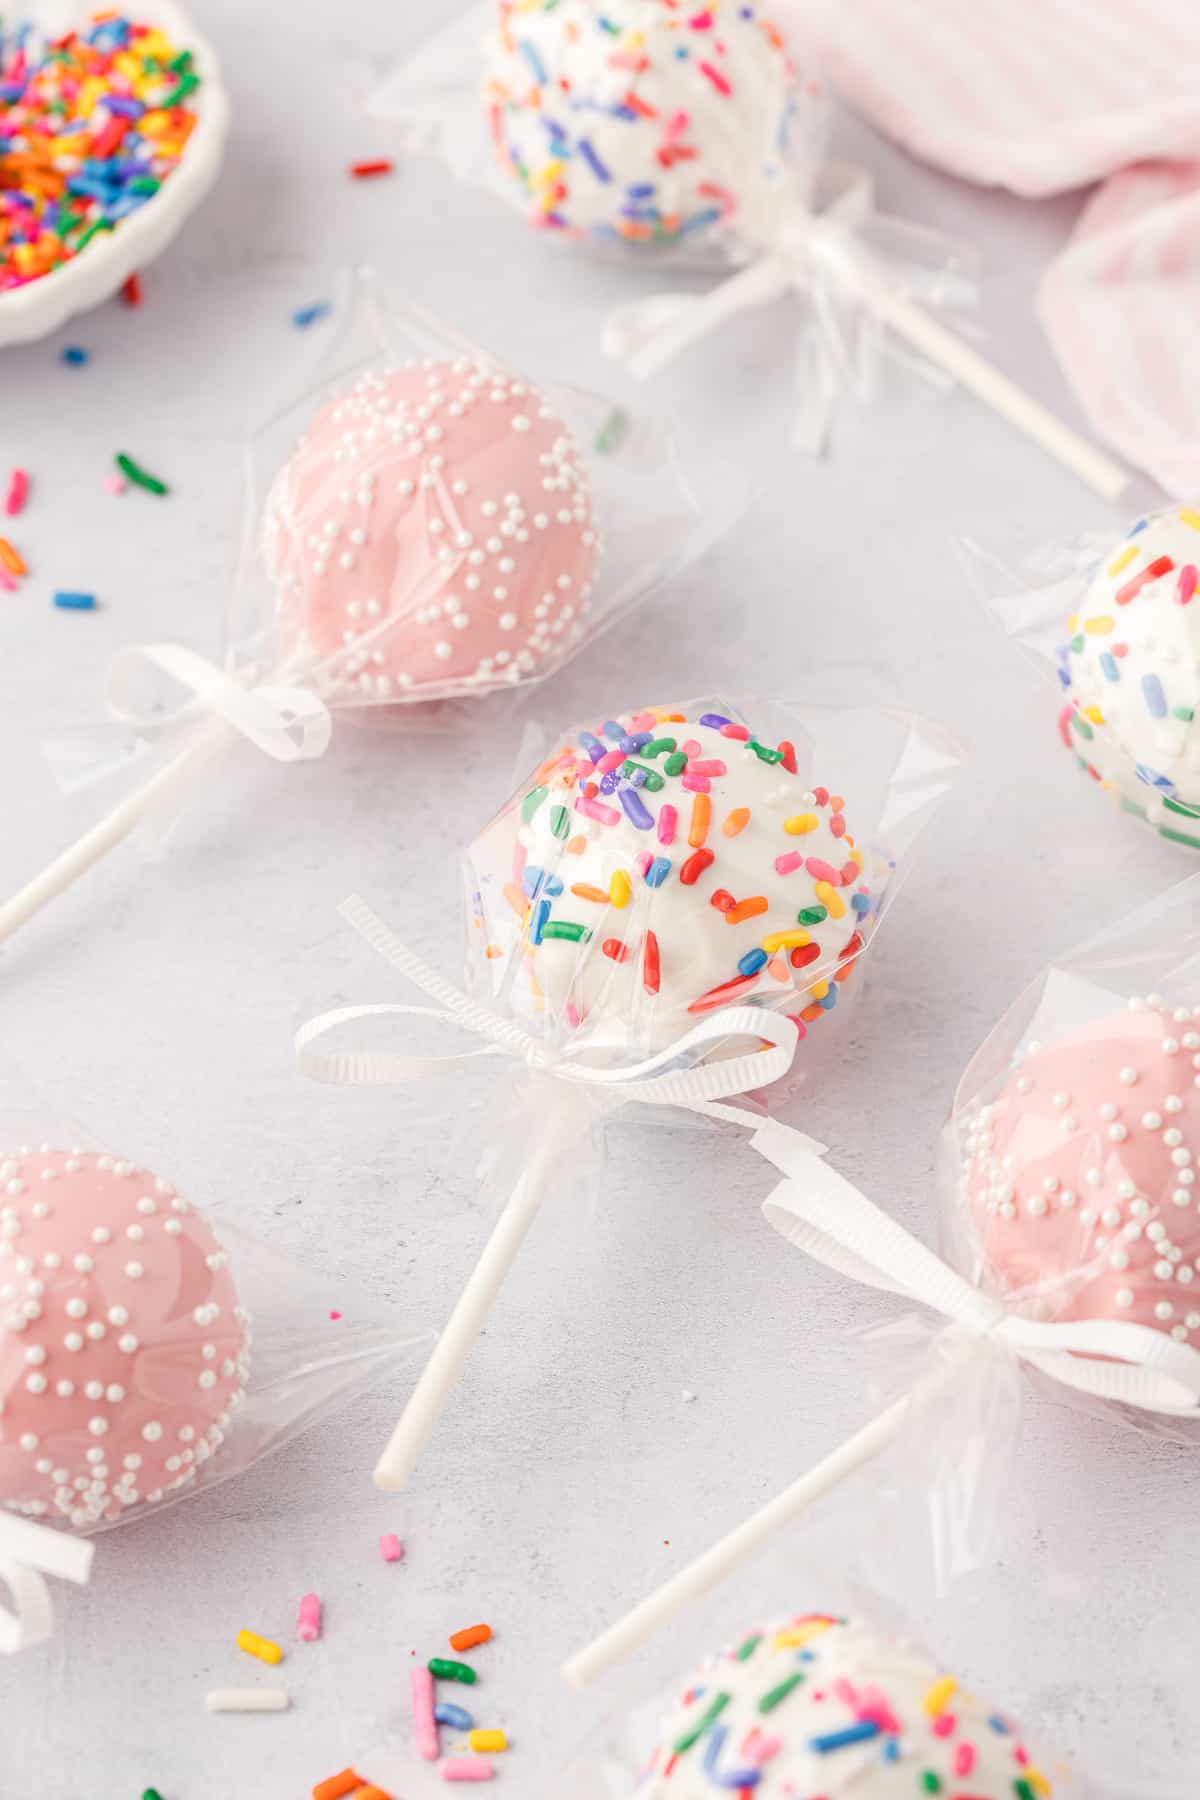 cake pops individually wrapped in plastic with white bows laying on a light grey surface, some pink with white sprinkles and some white with rainbow sprinkles, with rainbow sprinkles scattered around